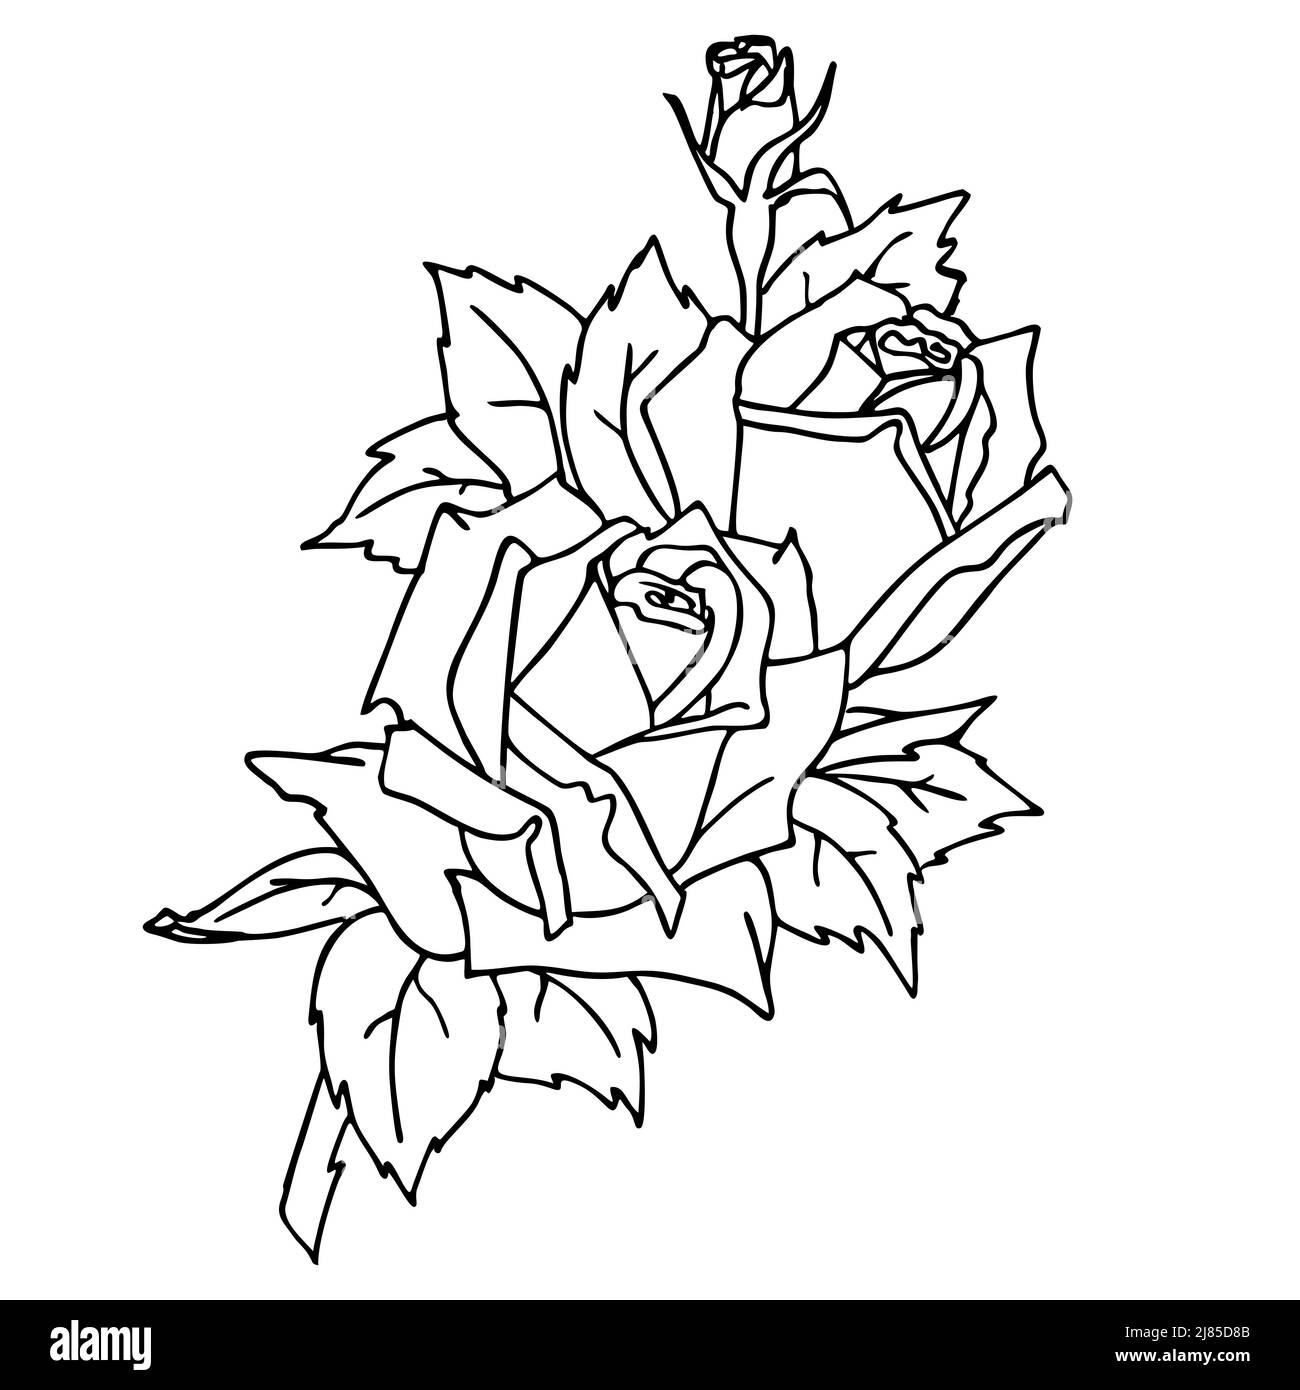 isolated black contour drawing of a rose branch on a white background graphics, coloring, design Stock Photo